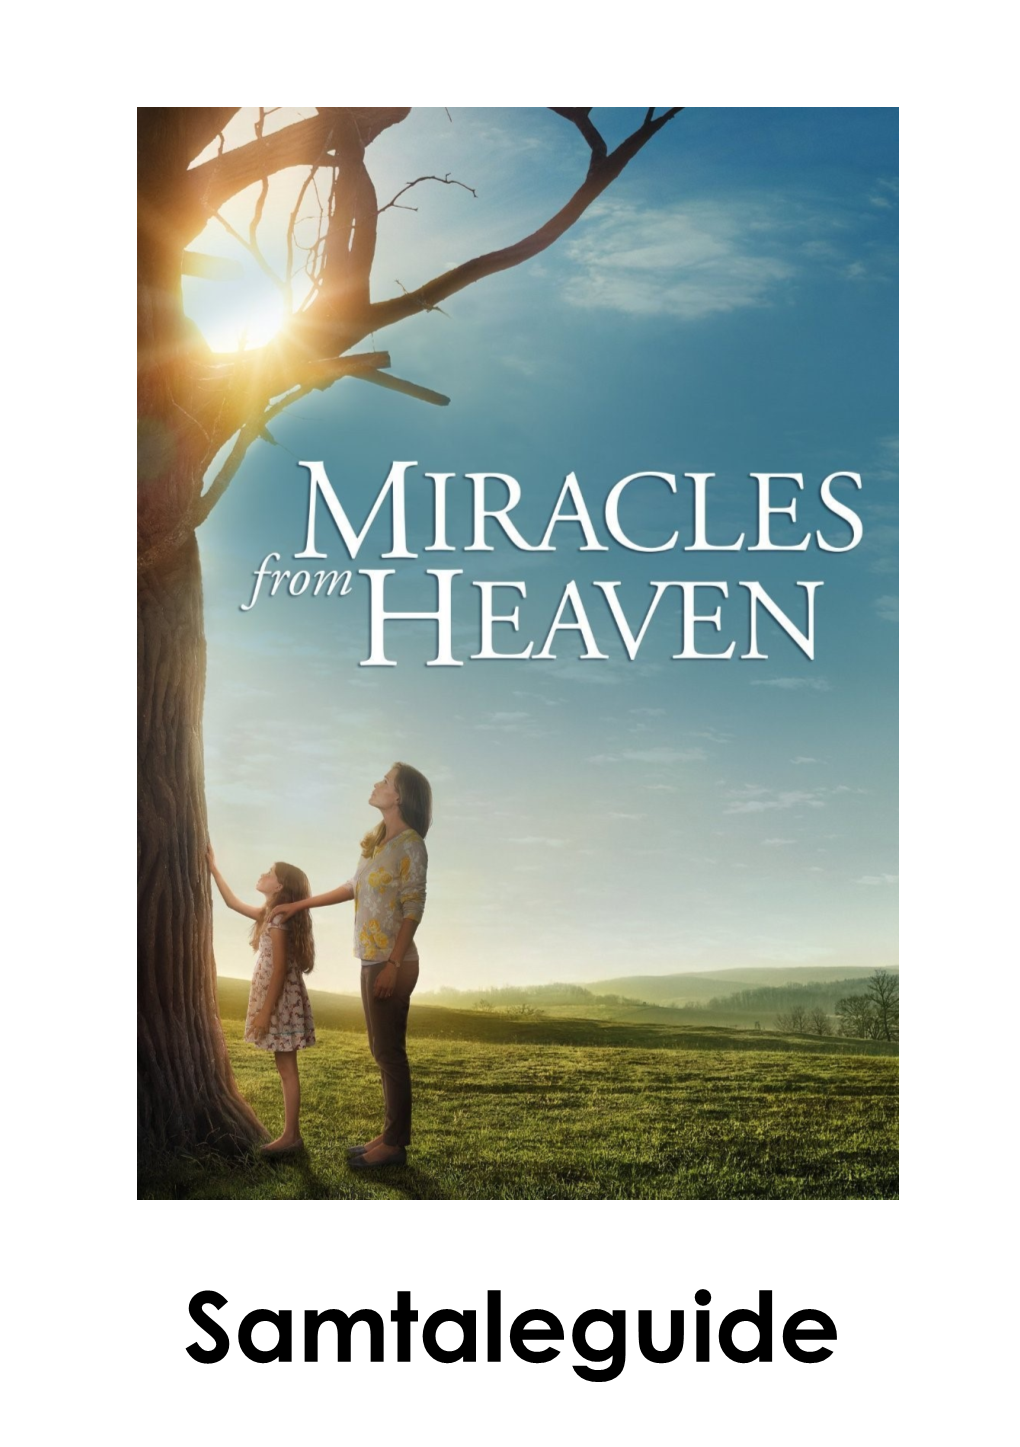 Samtaleguide Miracles from Heaven